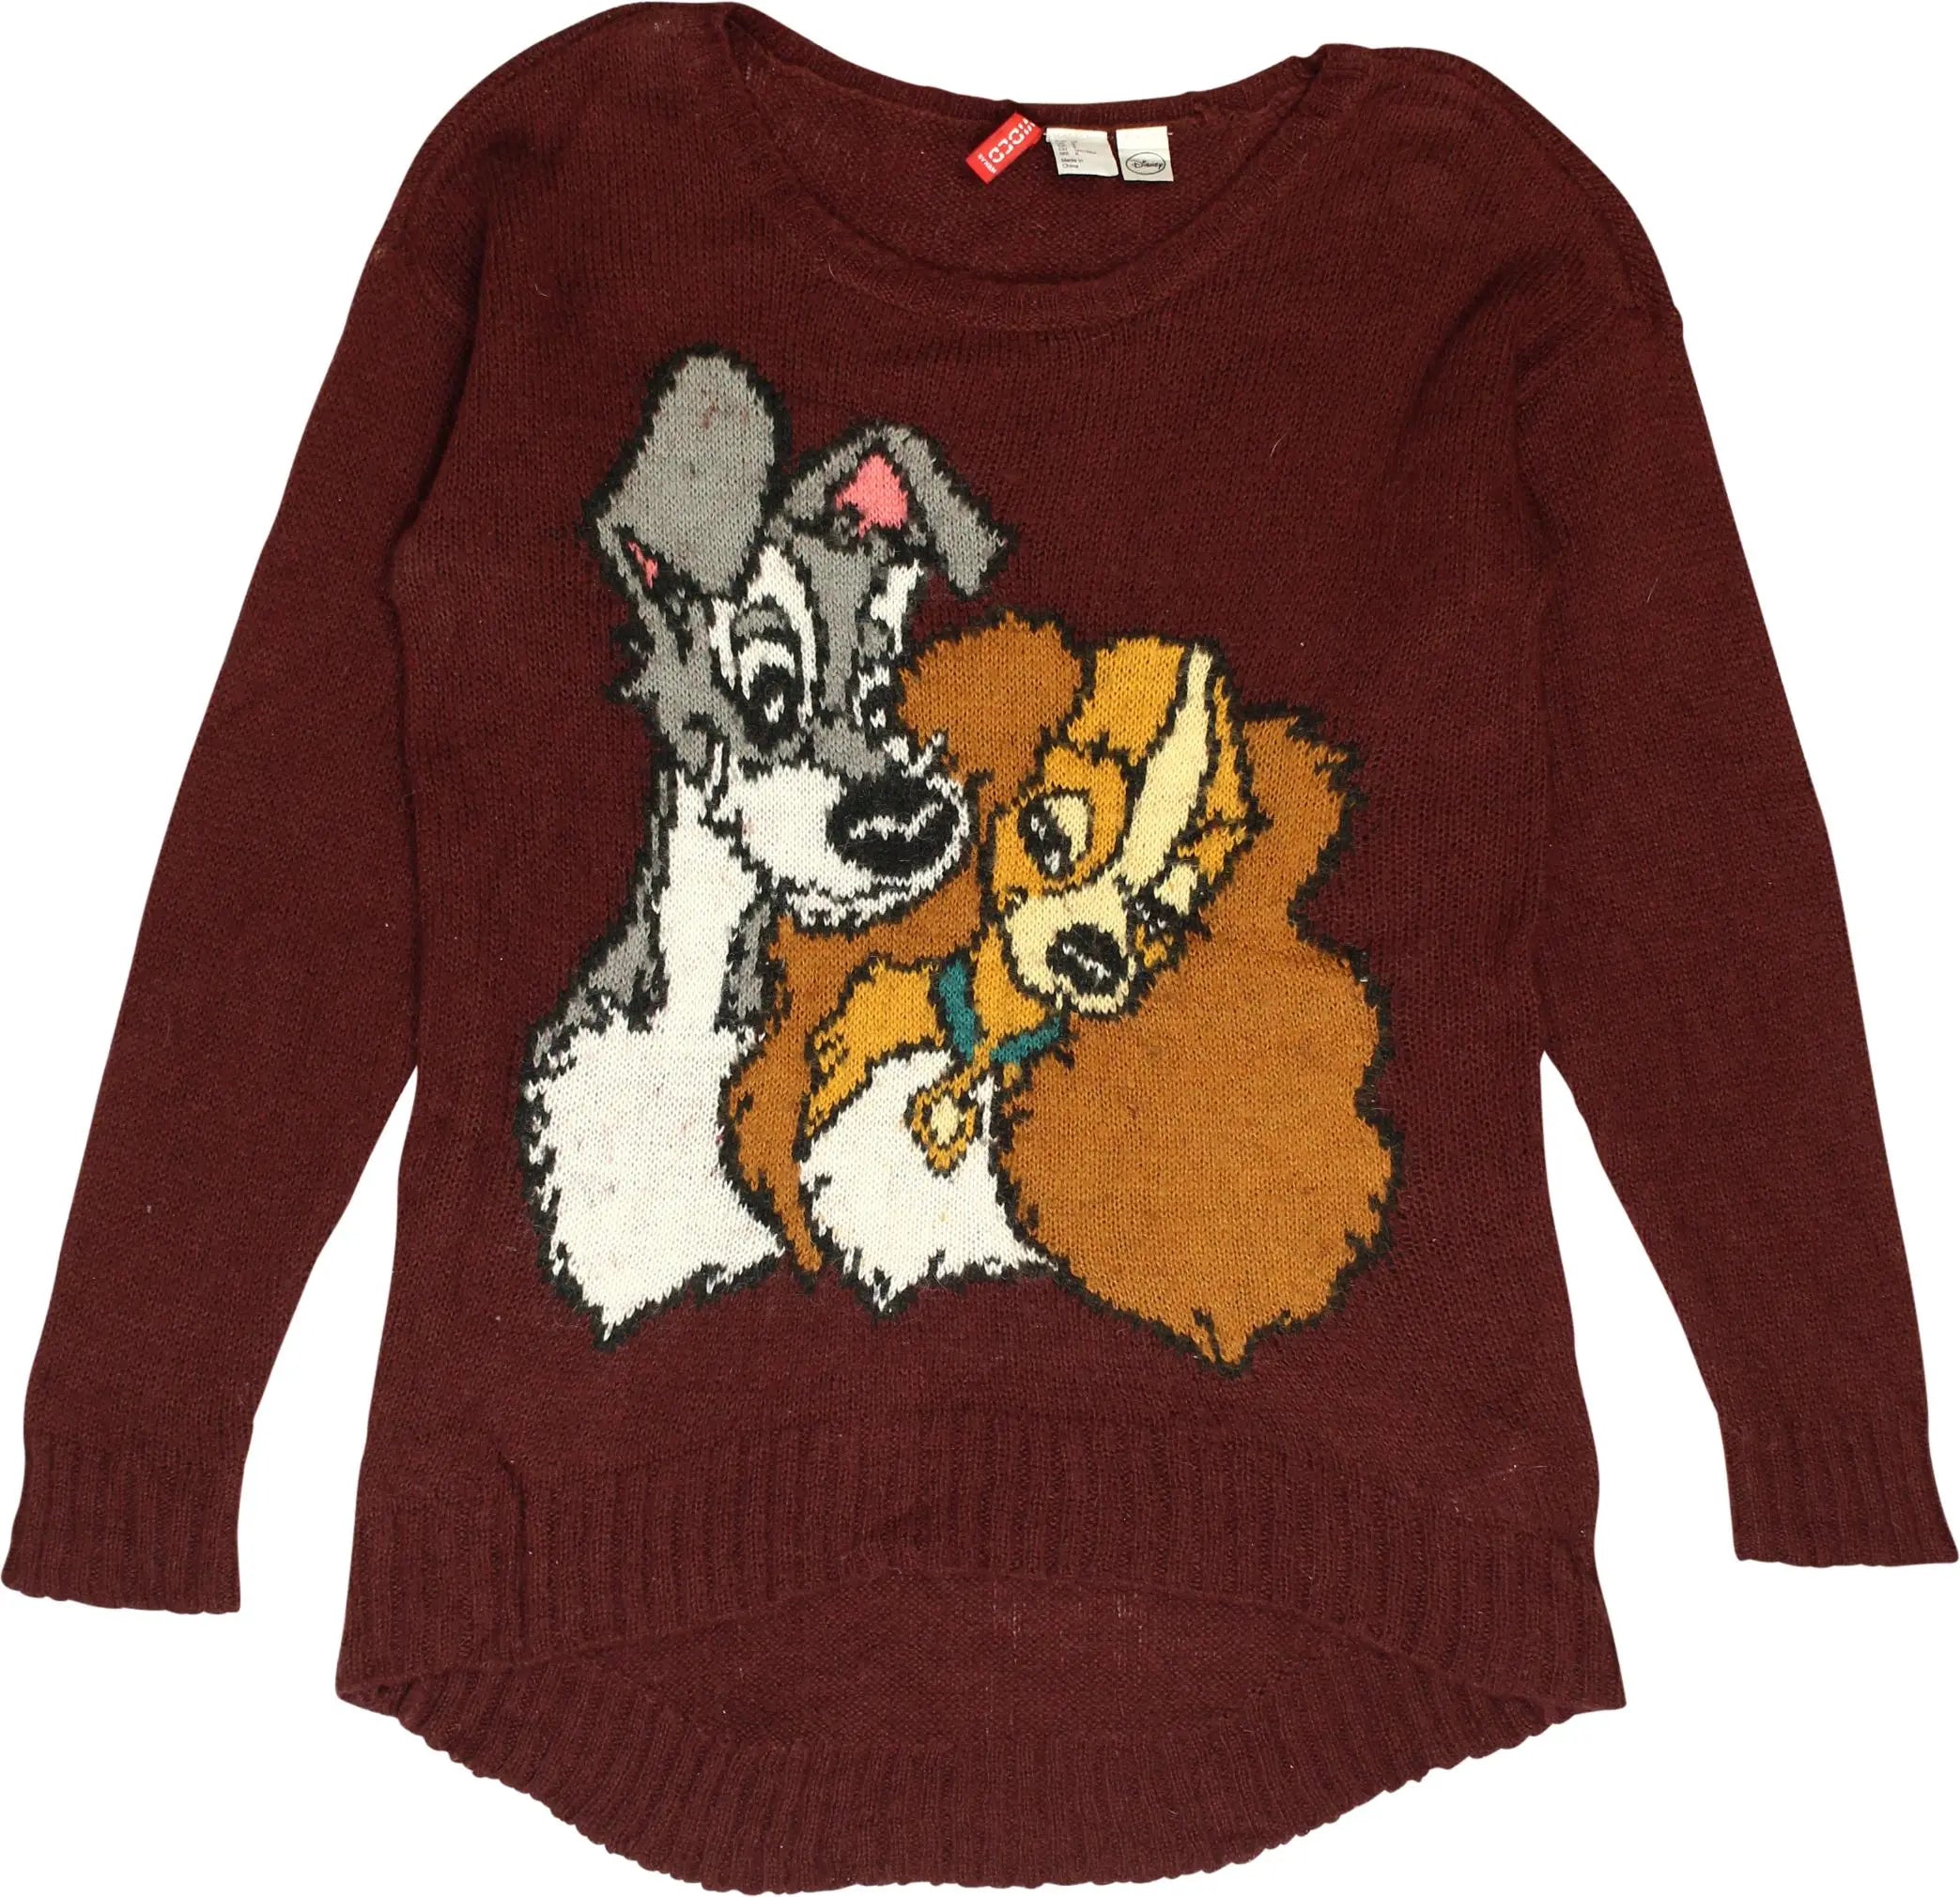 H&M - Disney Lady and the Tramp Jumper- ThriftTale.com - Vintage and second handclothing